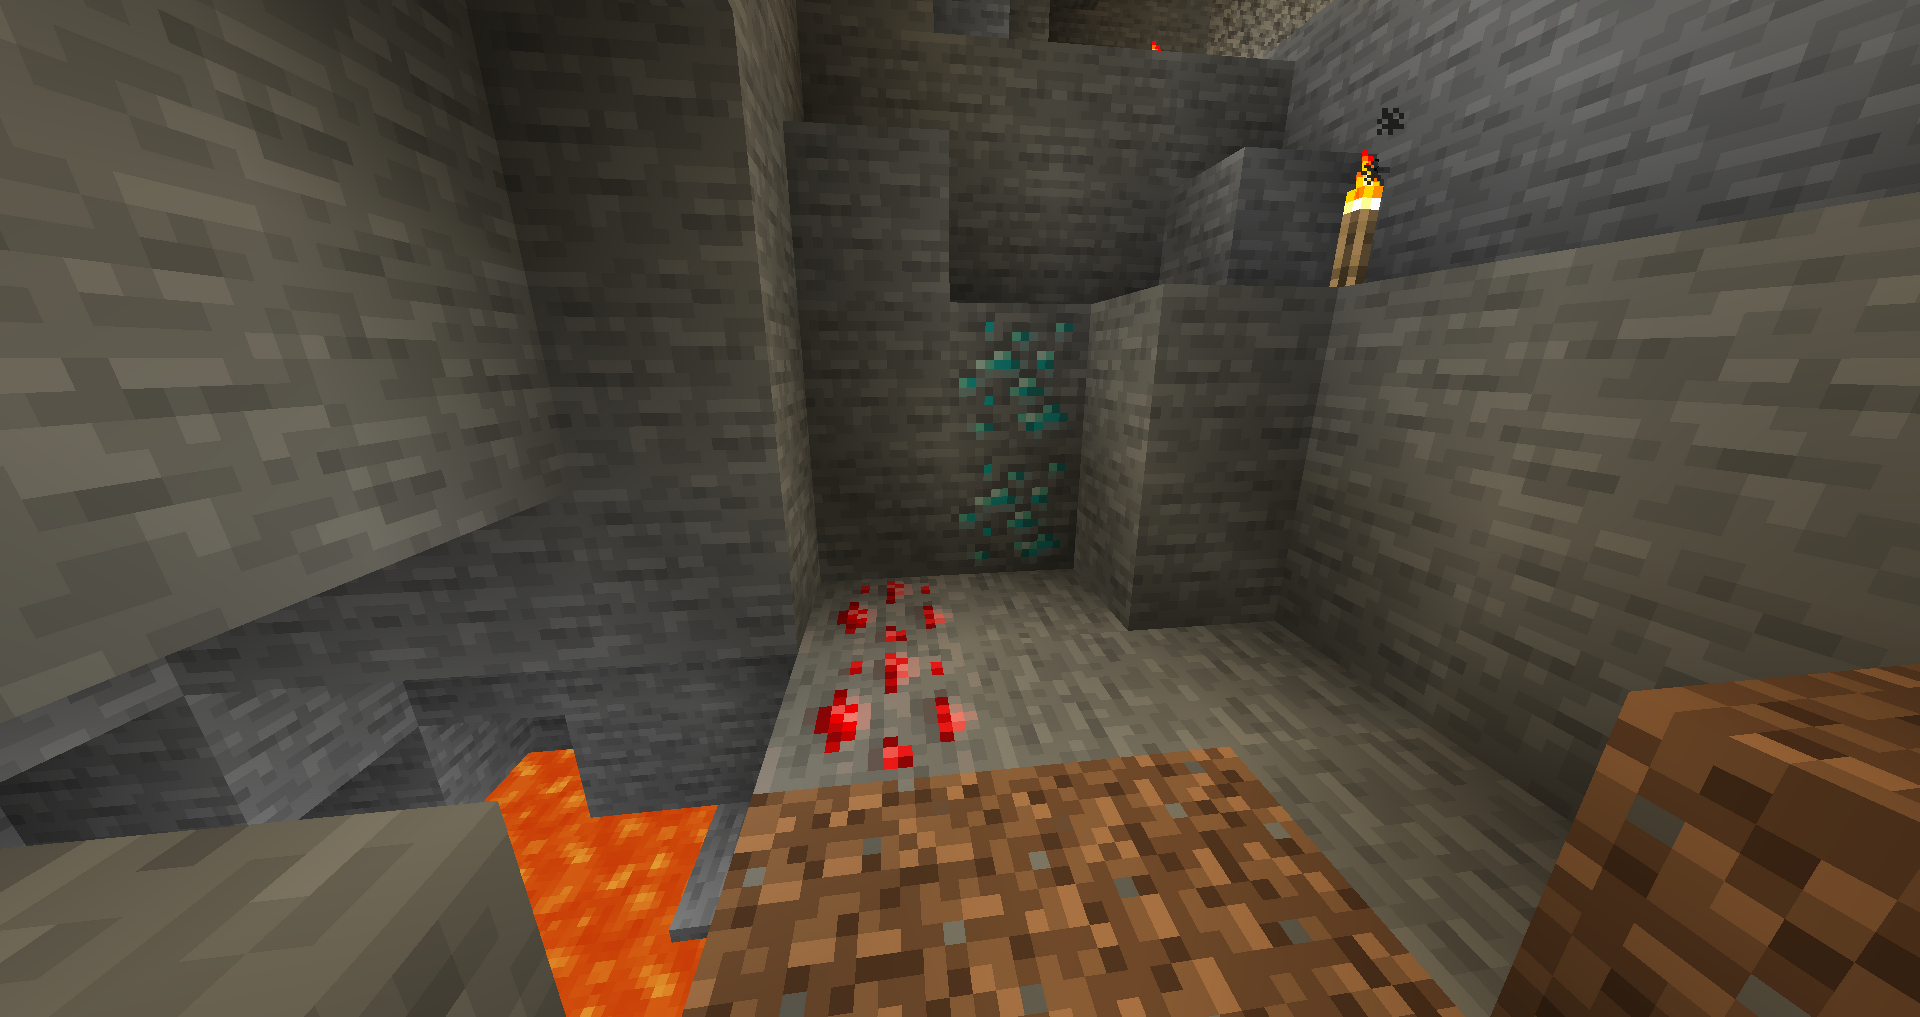 What Y level should I mine at for netherite if I place tnt on